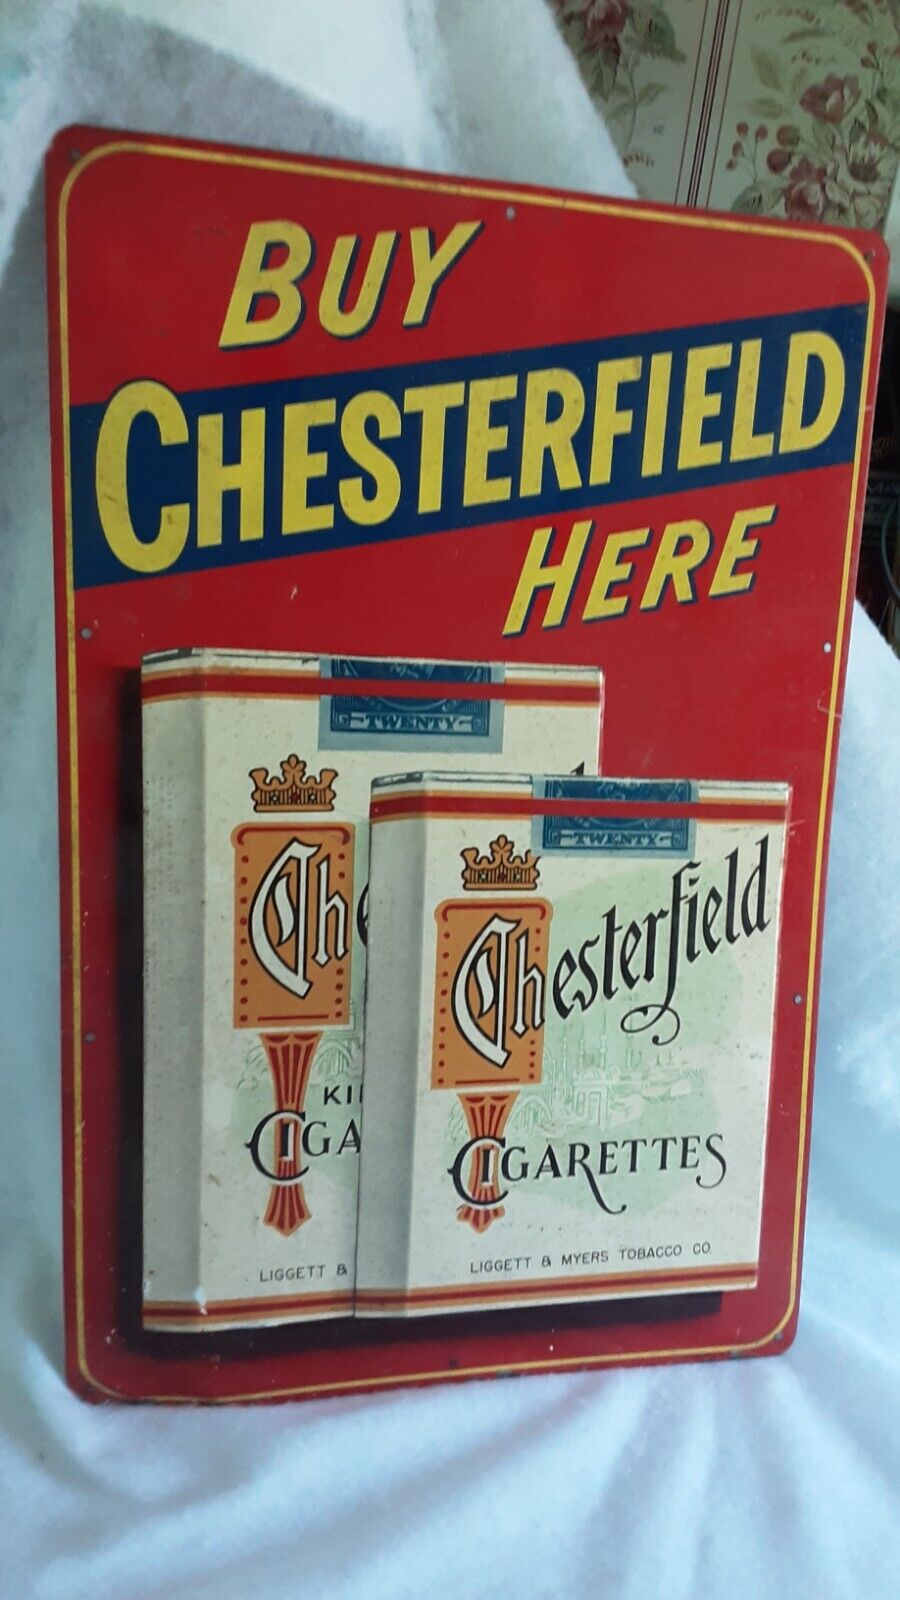 Vintage Chesterfield Tin Cigarette Advertising Sign.1940s - 50s.